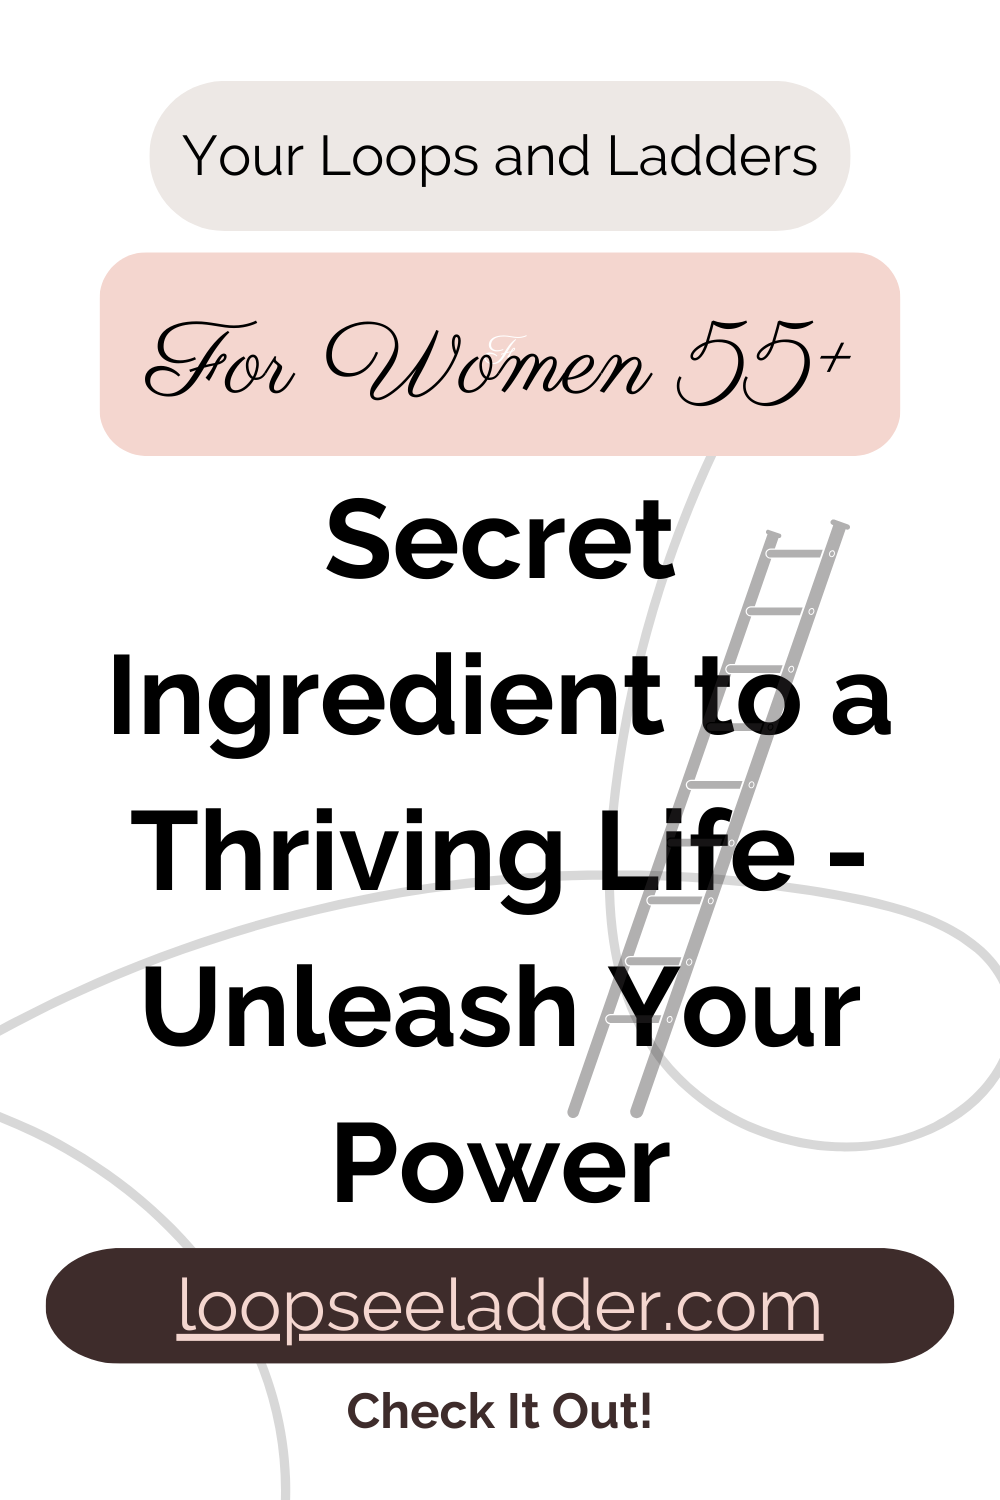 The Secret Ingredient to a Thriving Life: Unleashing the Power of Women 55+